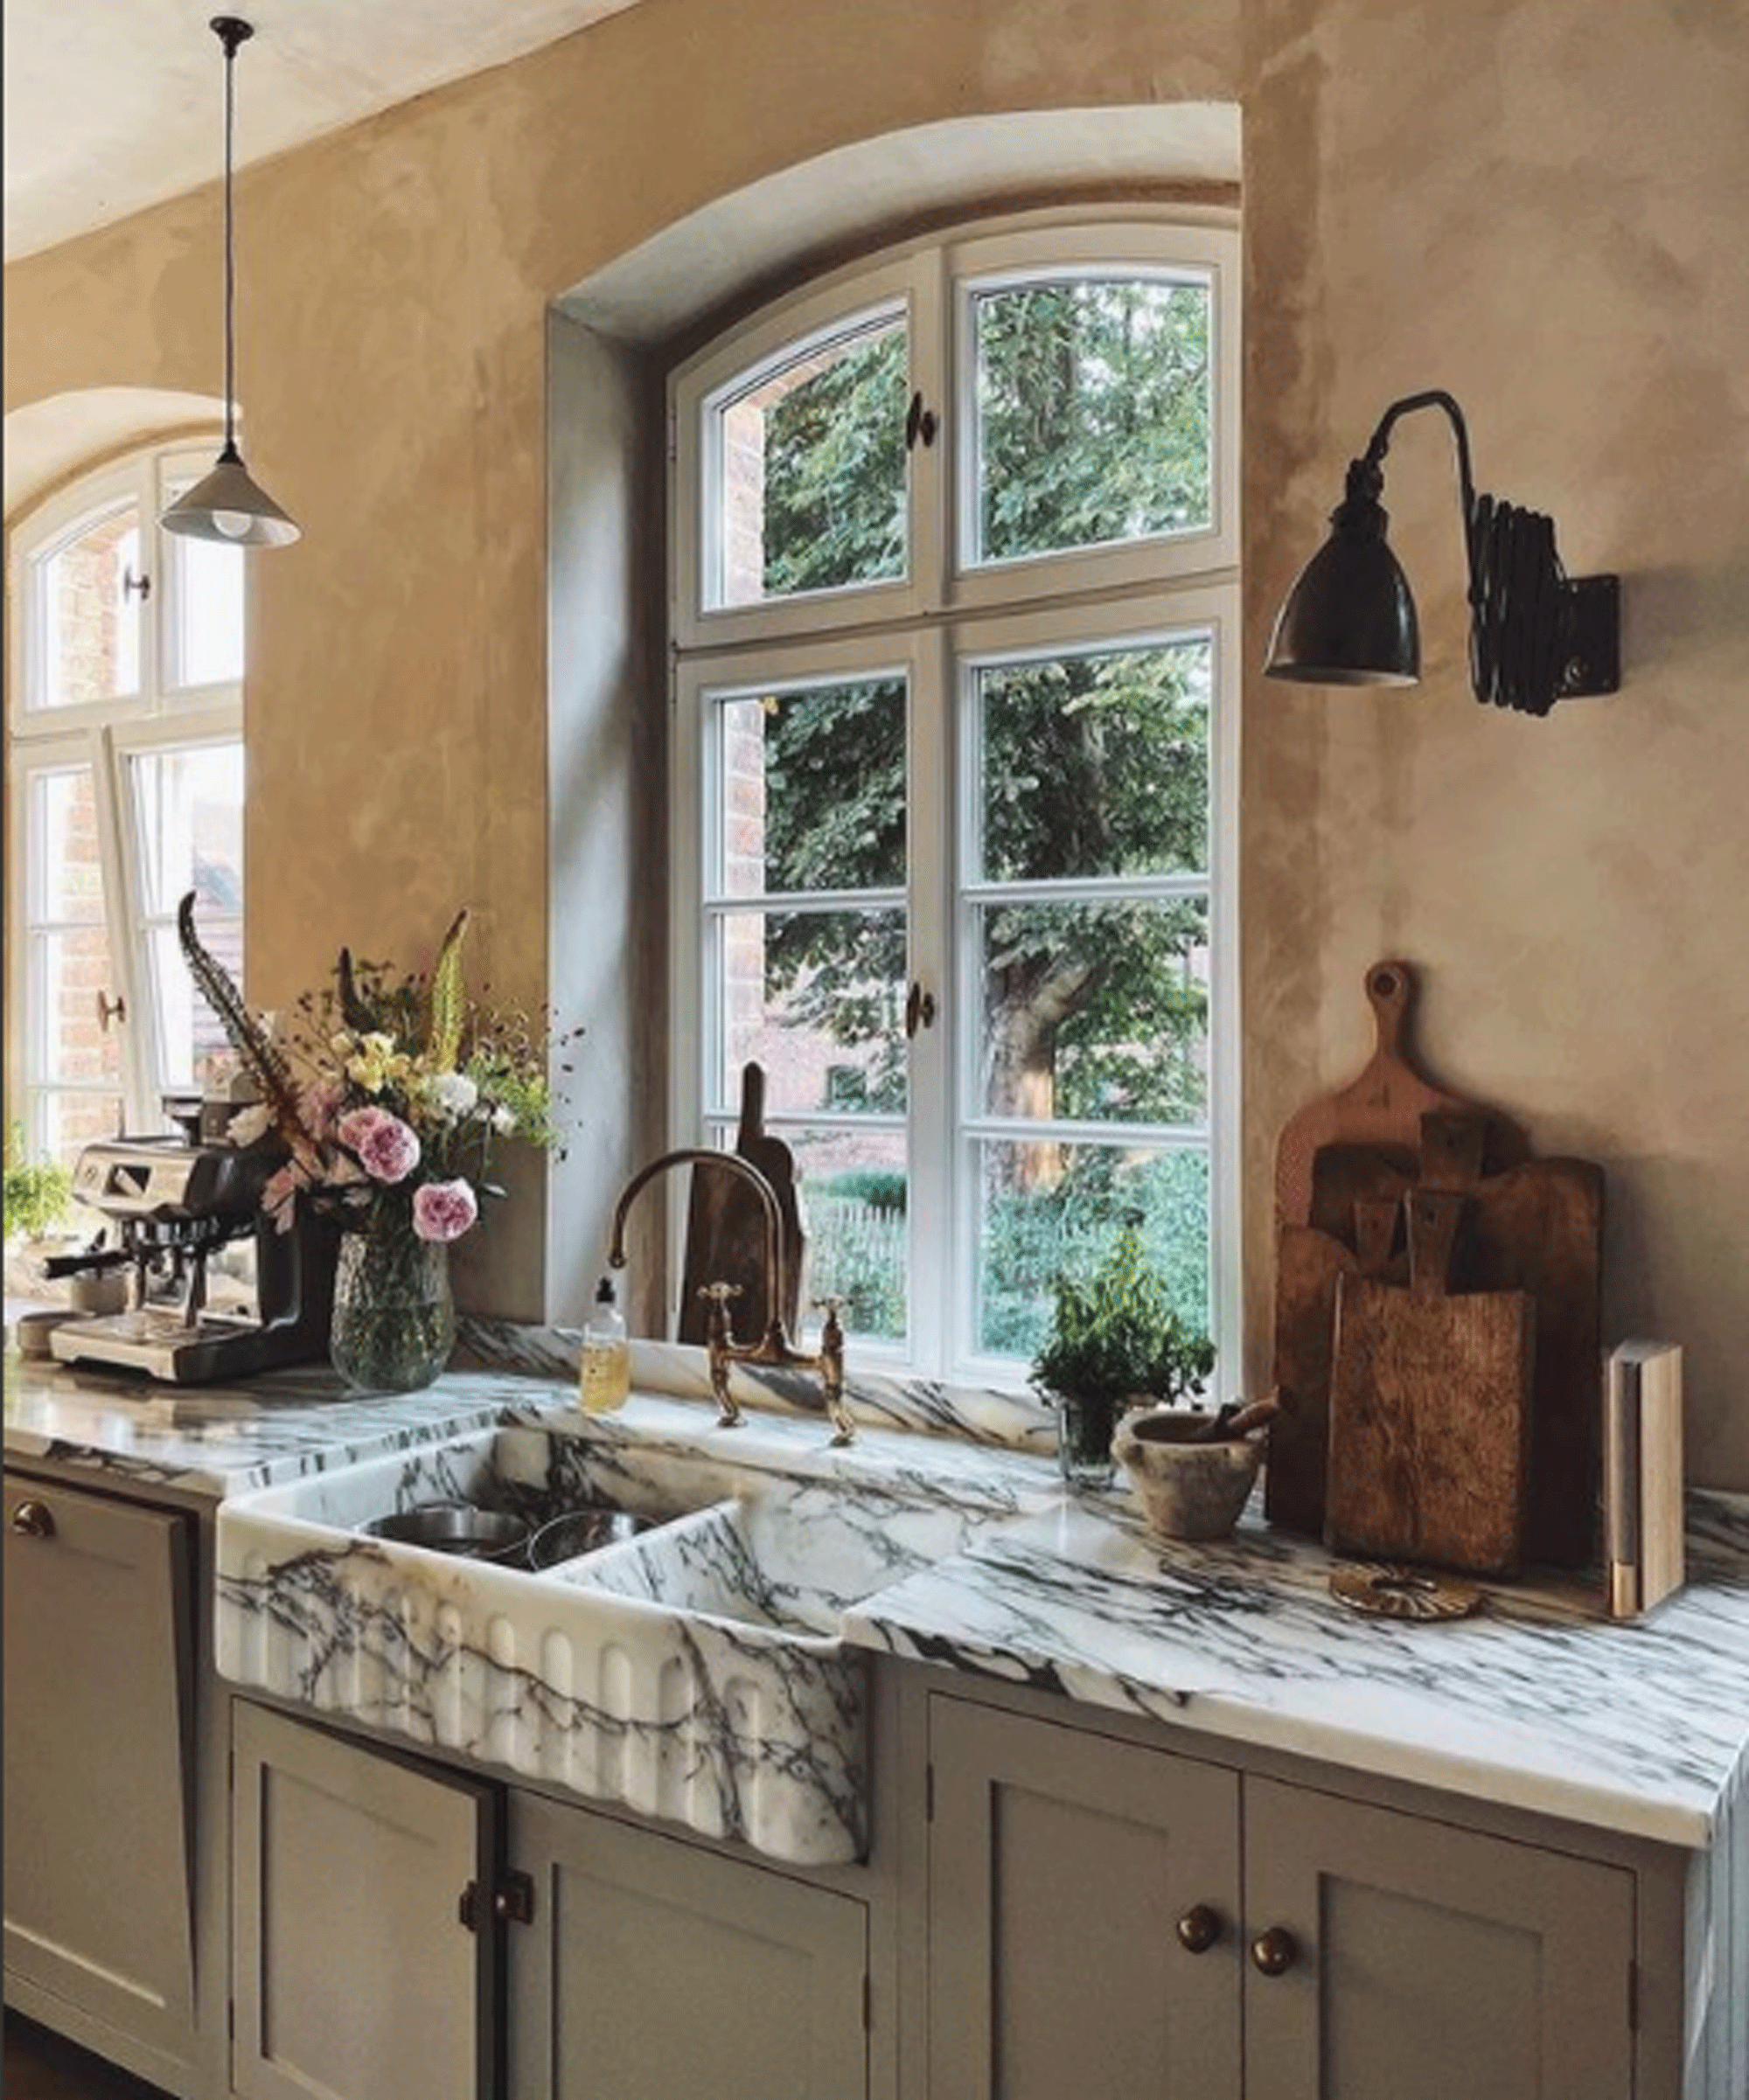 Kitchen with pink walls and deeply veined marble on the sink and worktop